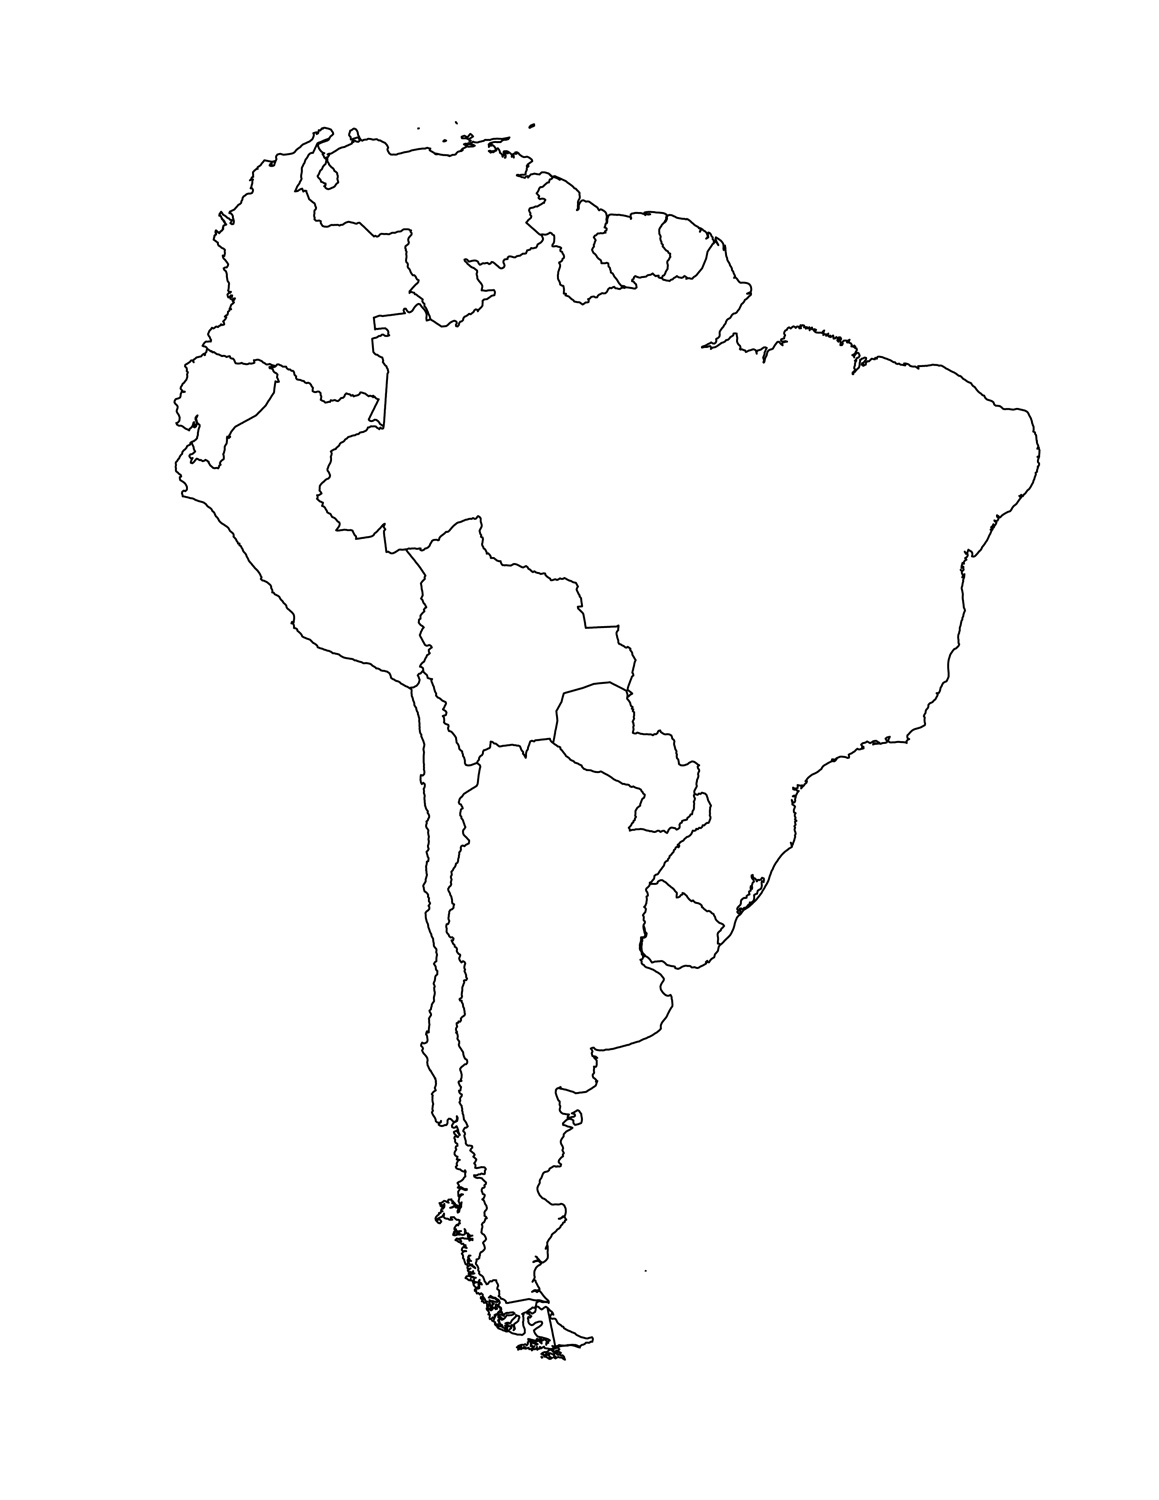 south-america-map-blank-political-map